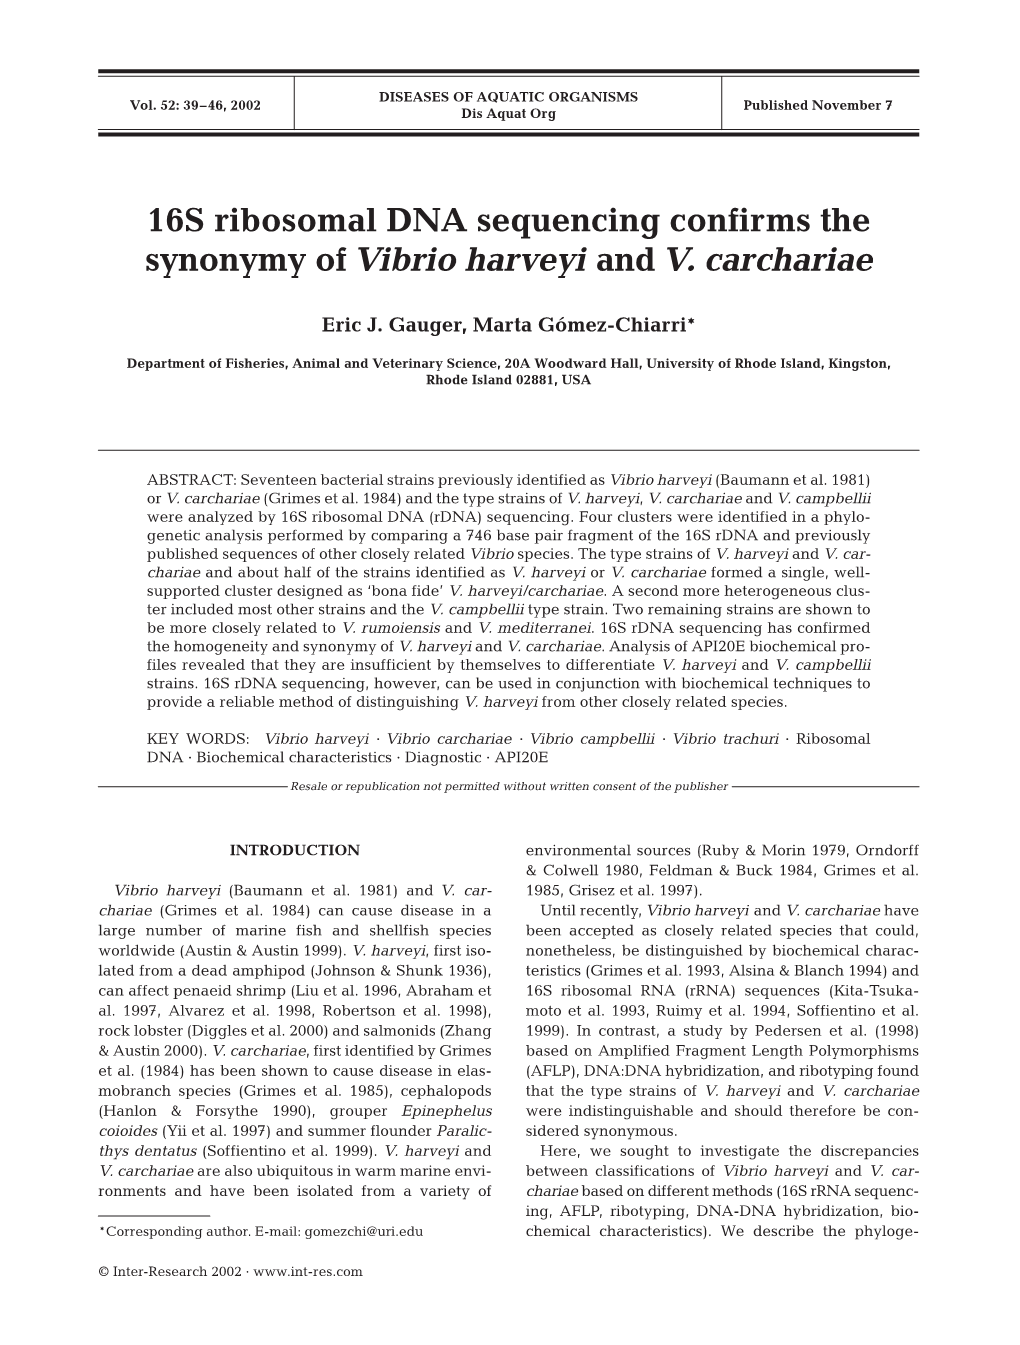 16S Ribosomal DNA Sequencing Confirms the Synonymy of Vibrio Harveyi and V